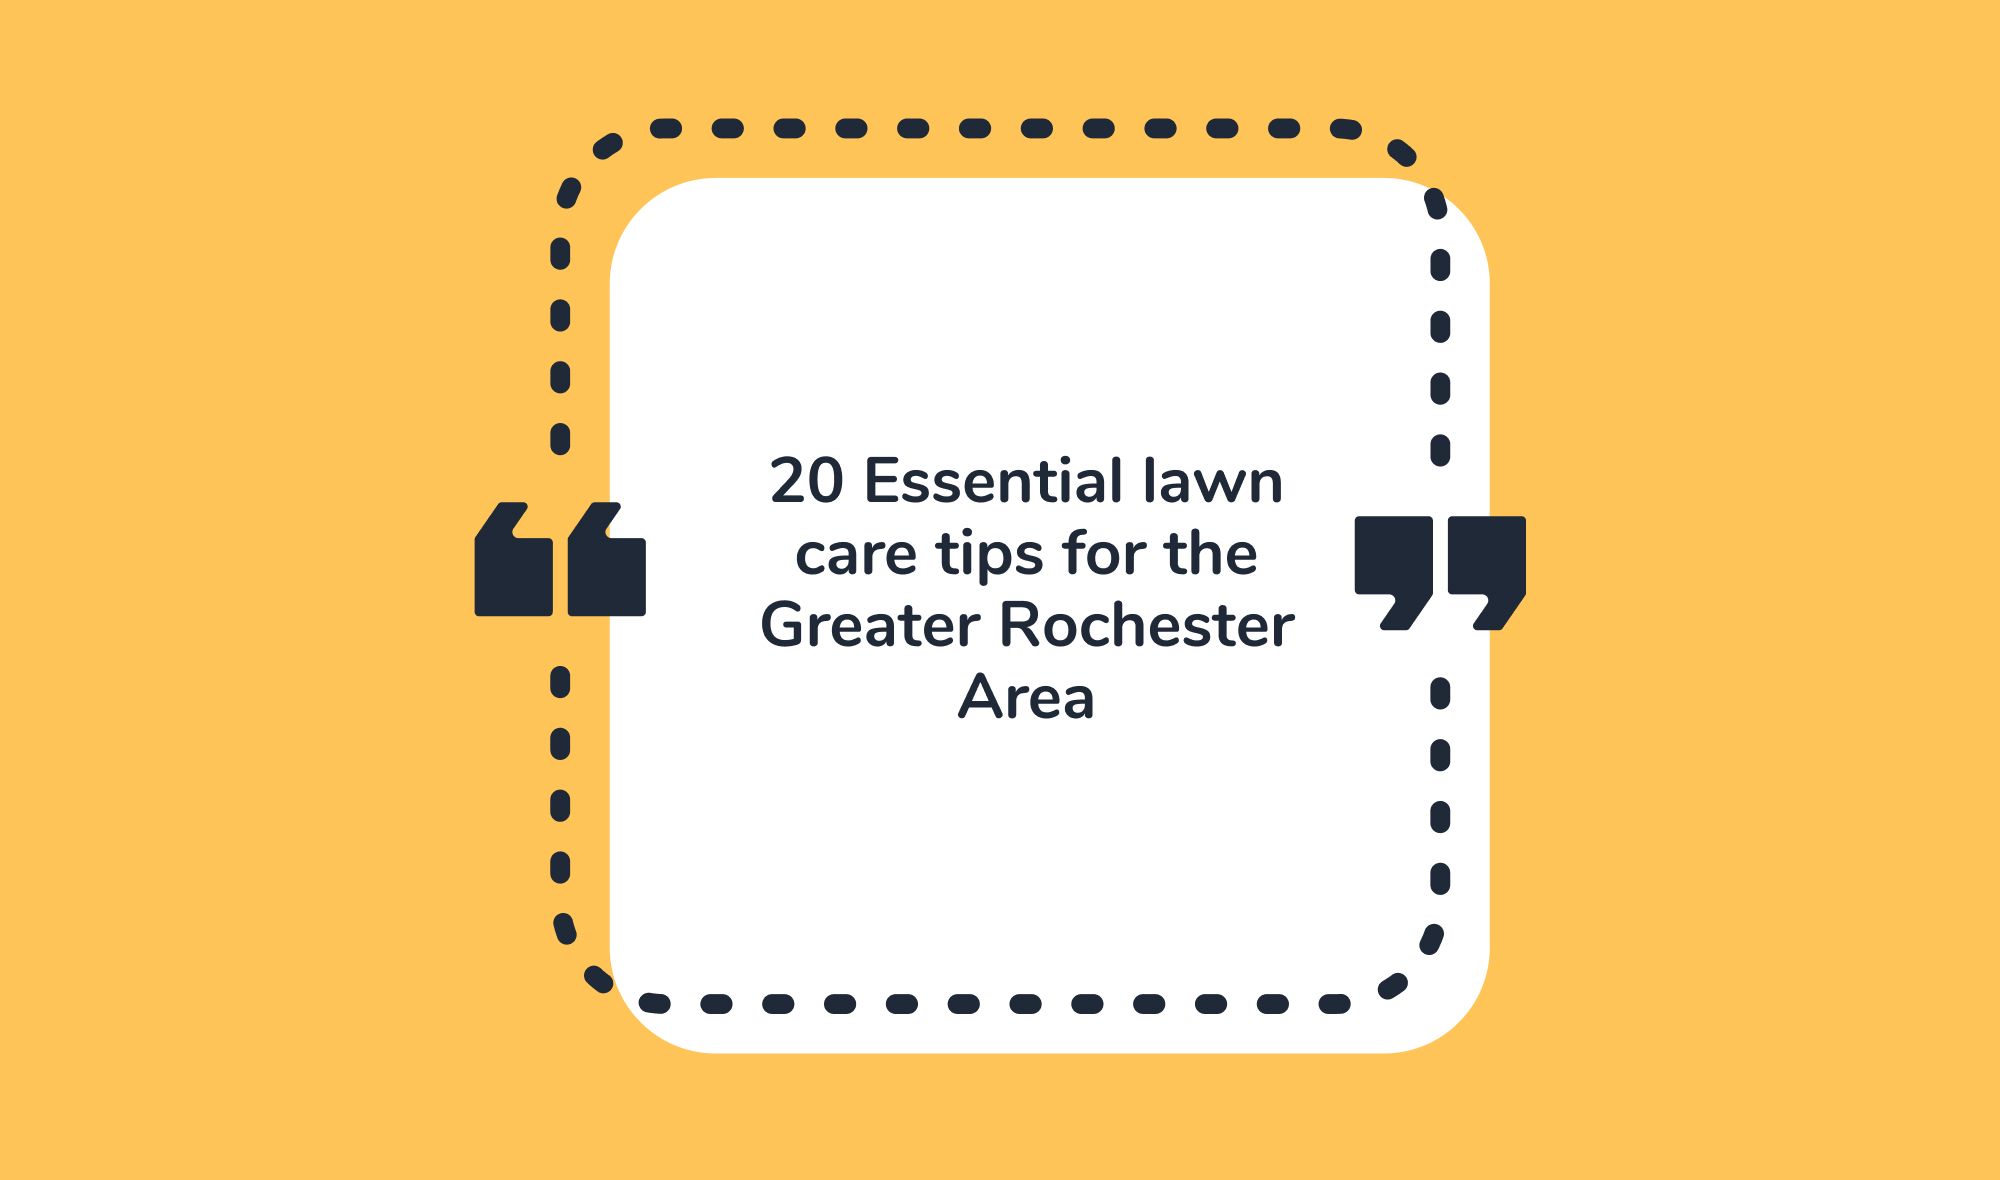 20 Essential lawn care tips for the Greater Rochester Area